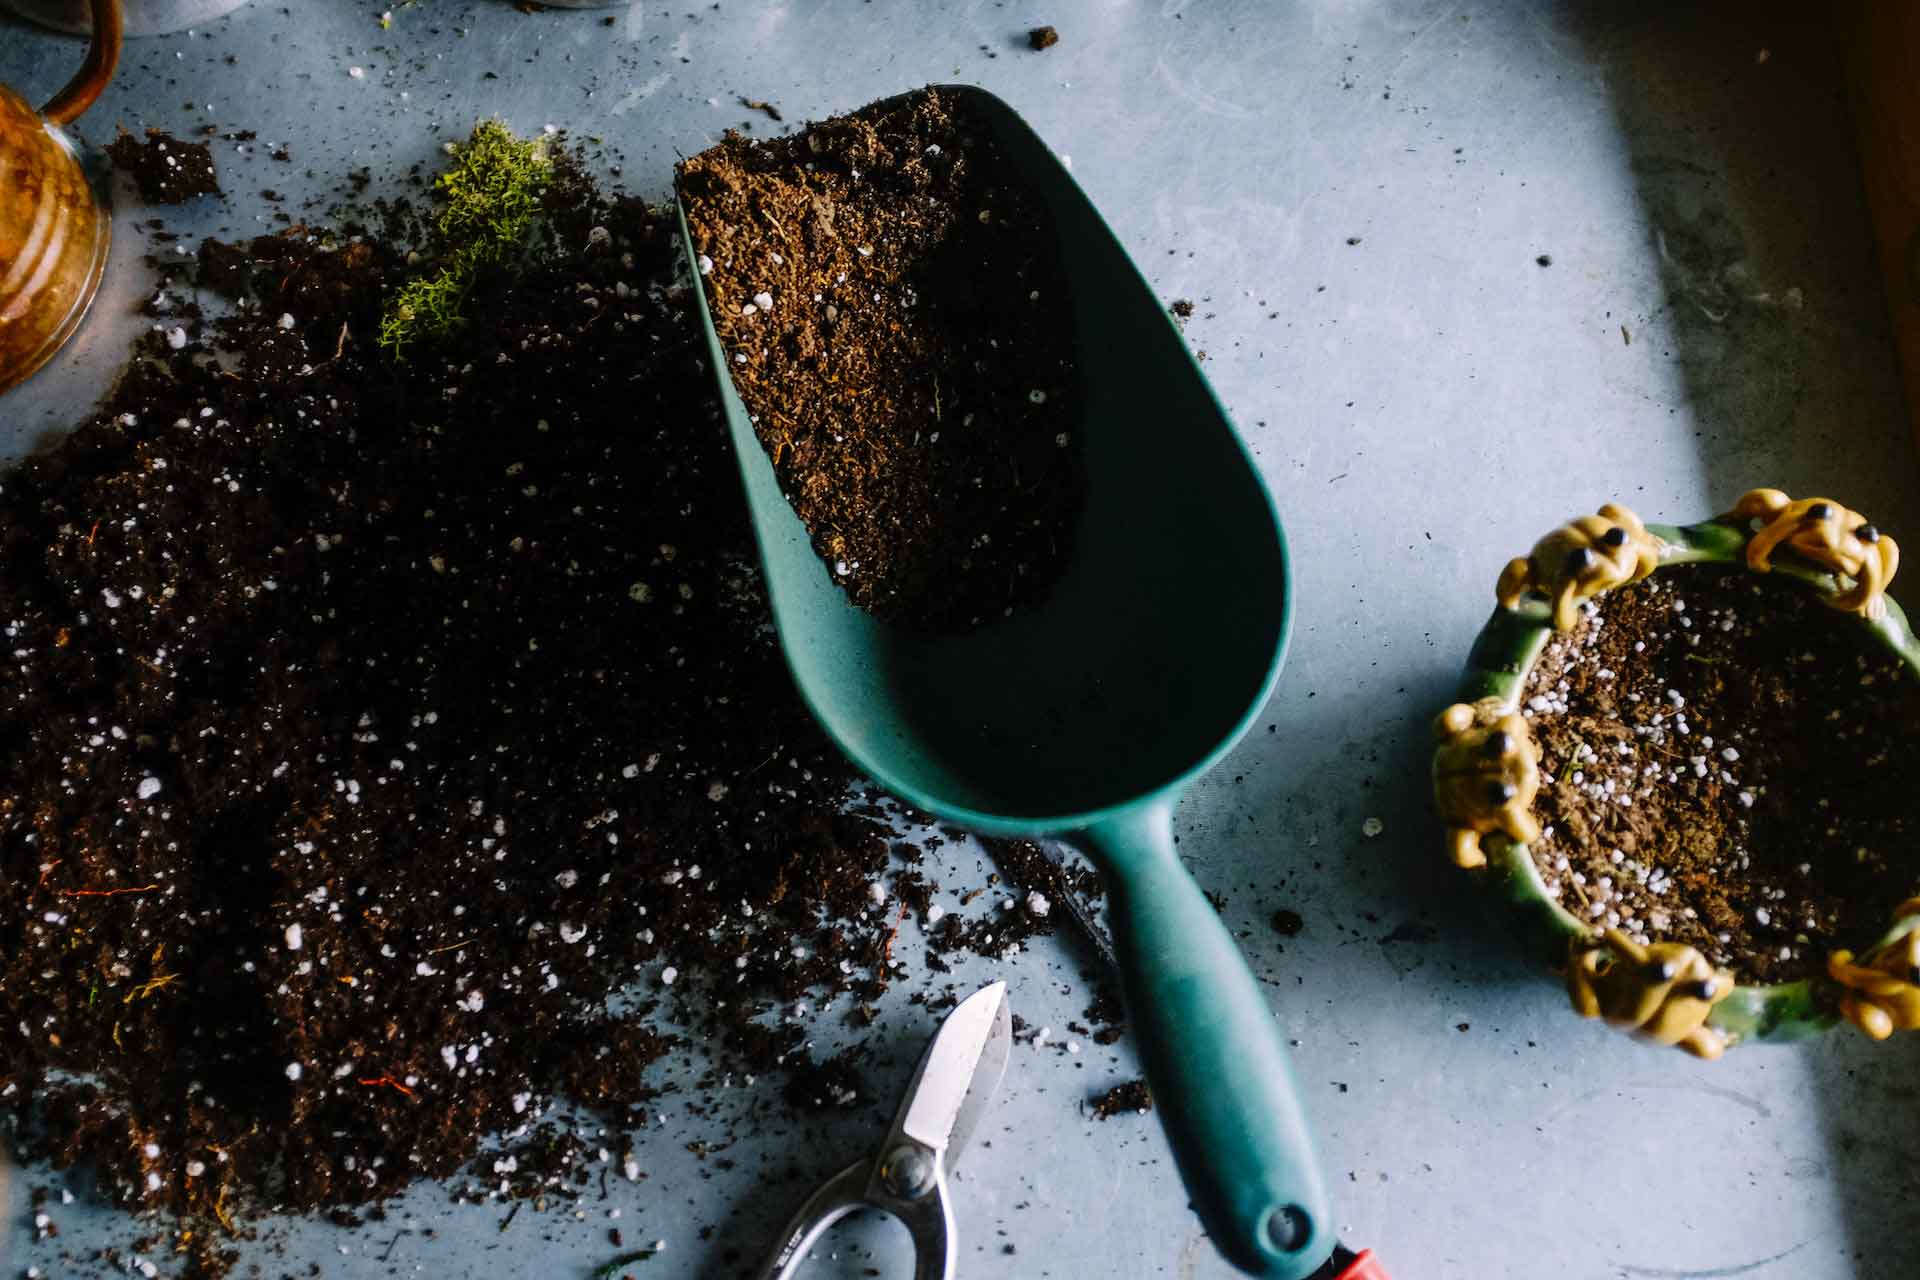 Blue garden shovel filled with brown soil on a table